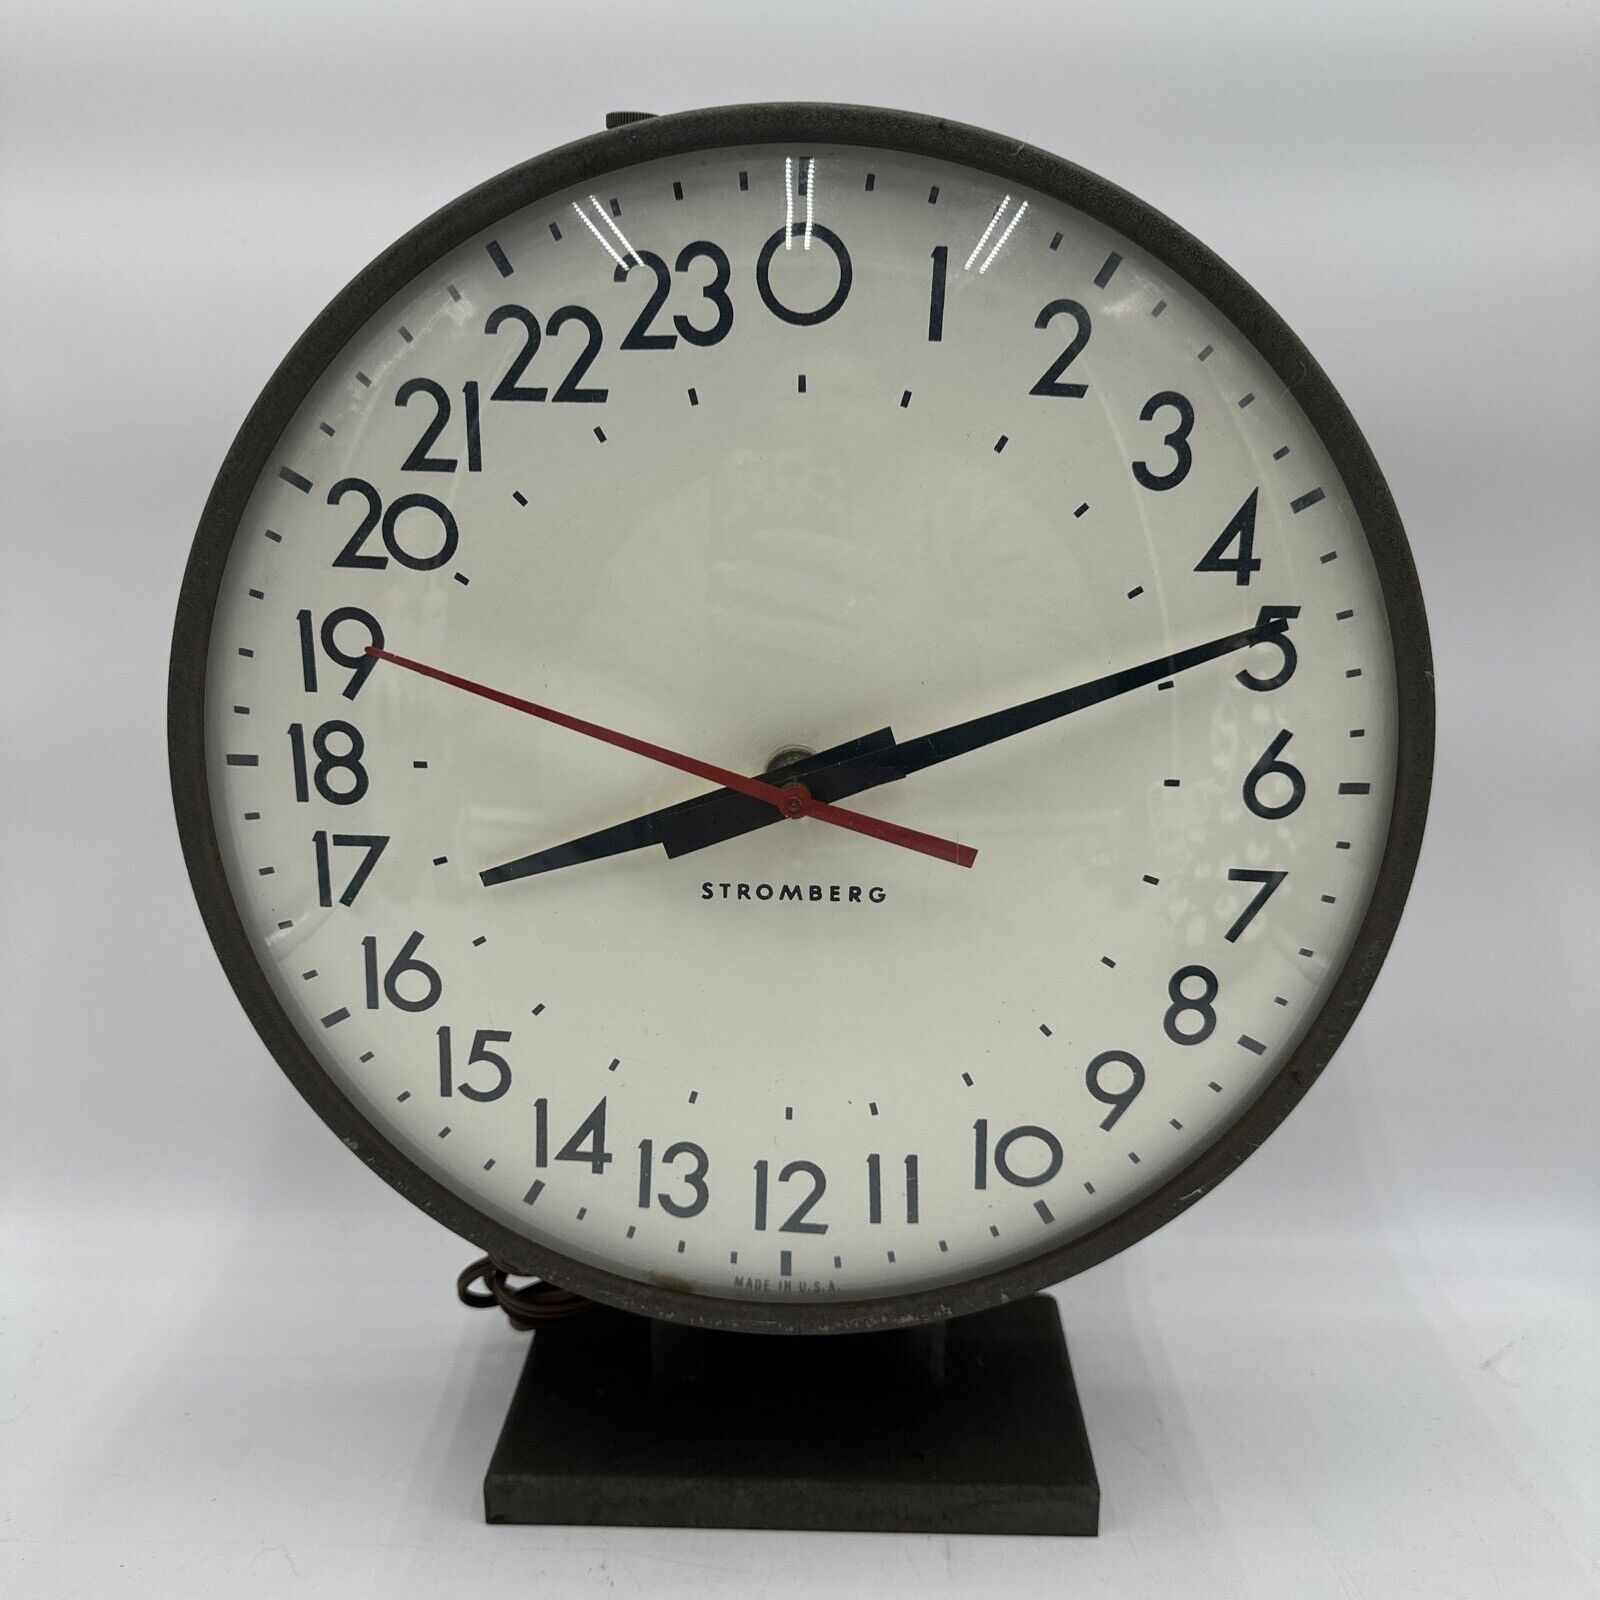 STROMBERG ELECTRIC 24 HOUR MILITARY WALL CLOCK LARGE 12”WORKS METAL/GLASS